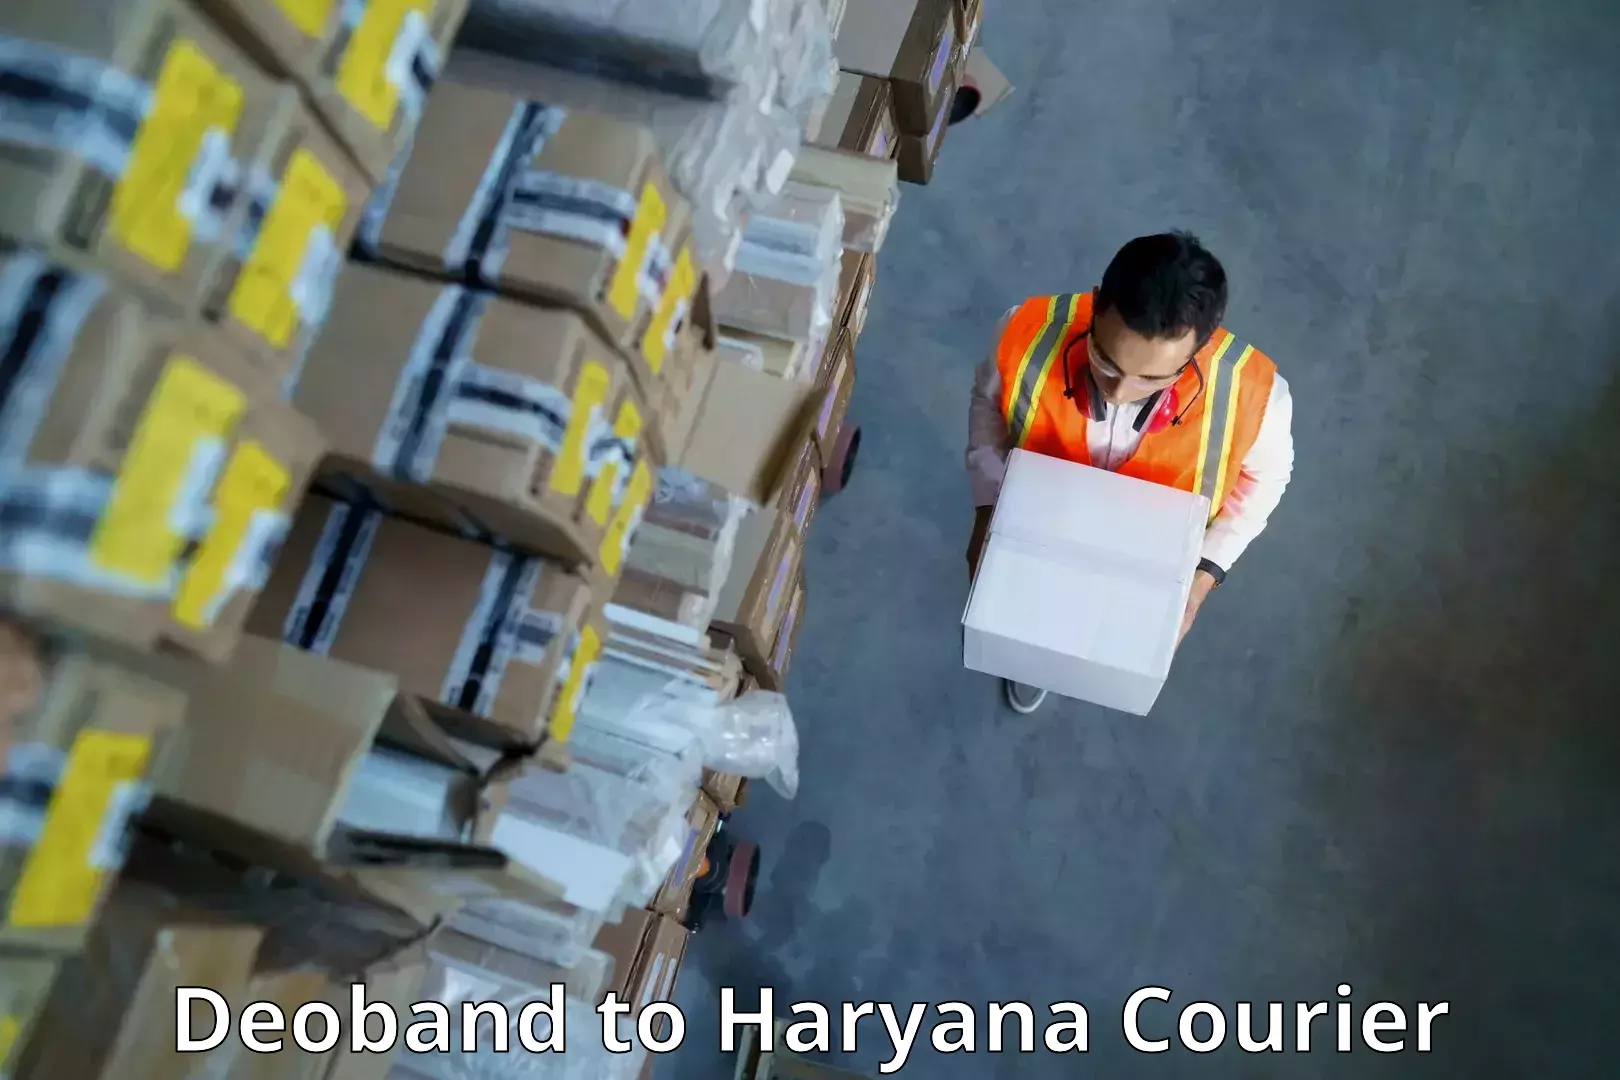 State-of-the-art courier technology Deoband to Haryana